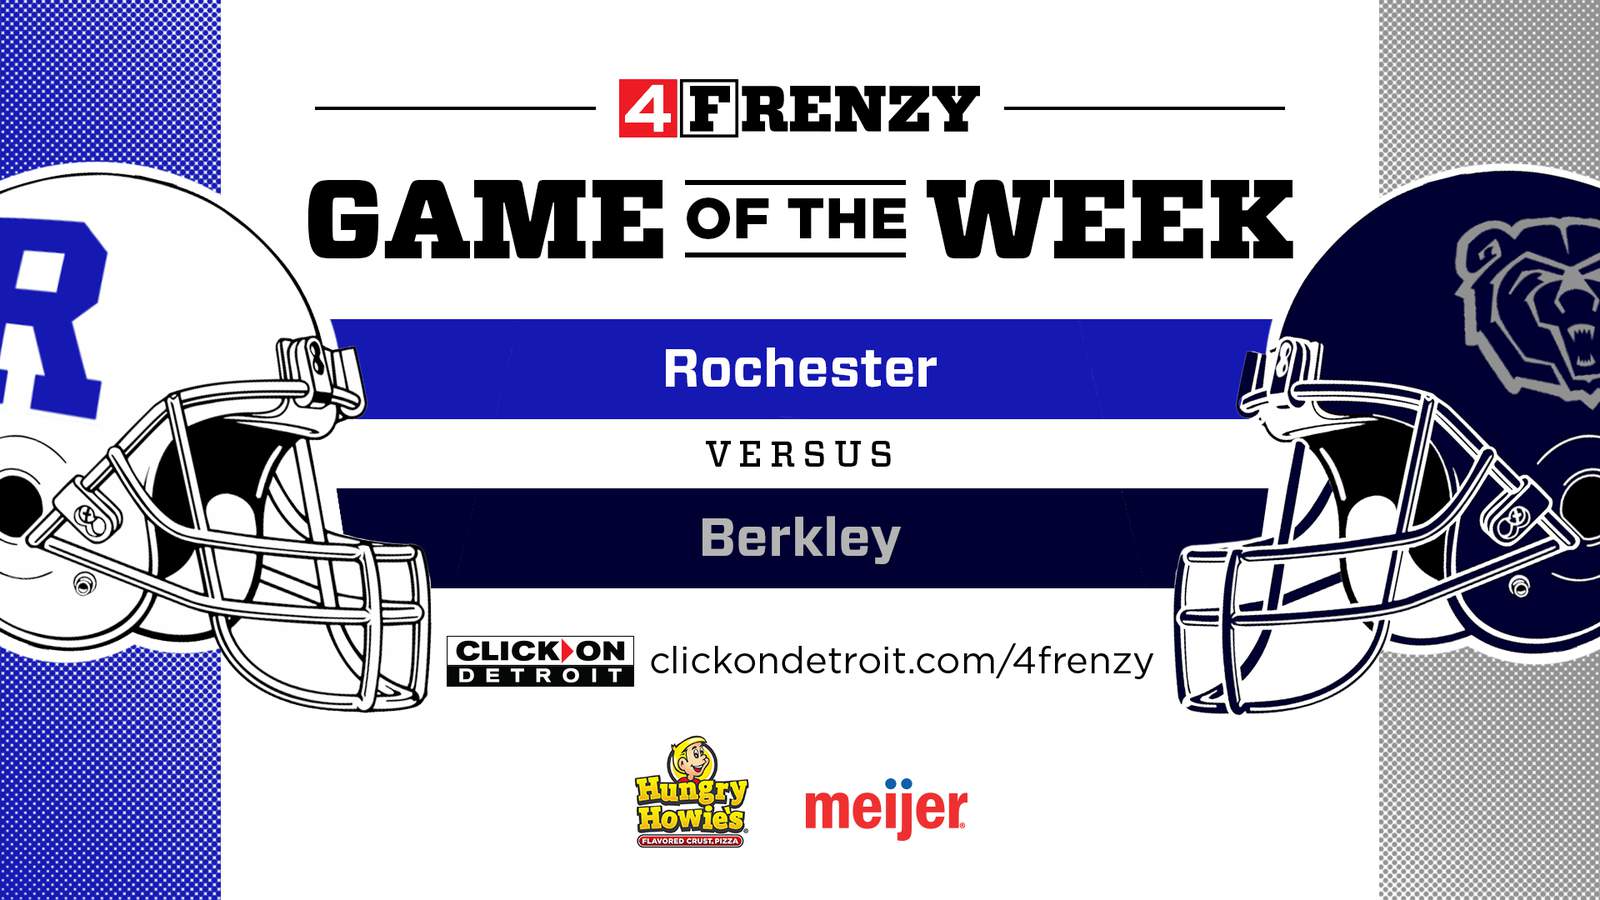 4Frenzy Game of the Week highlights